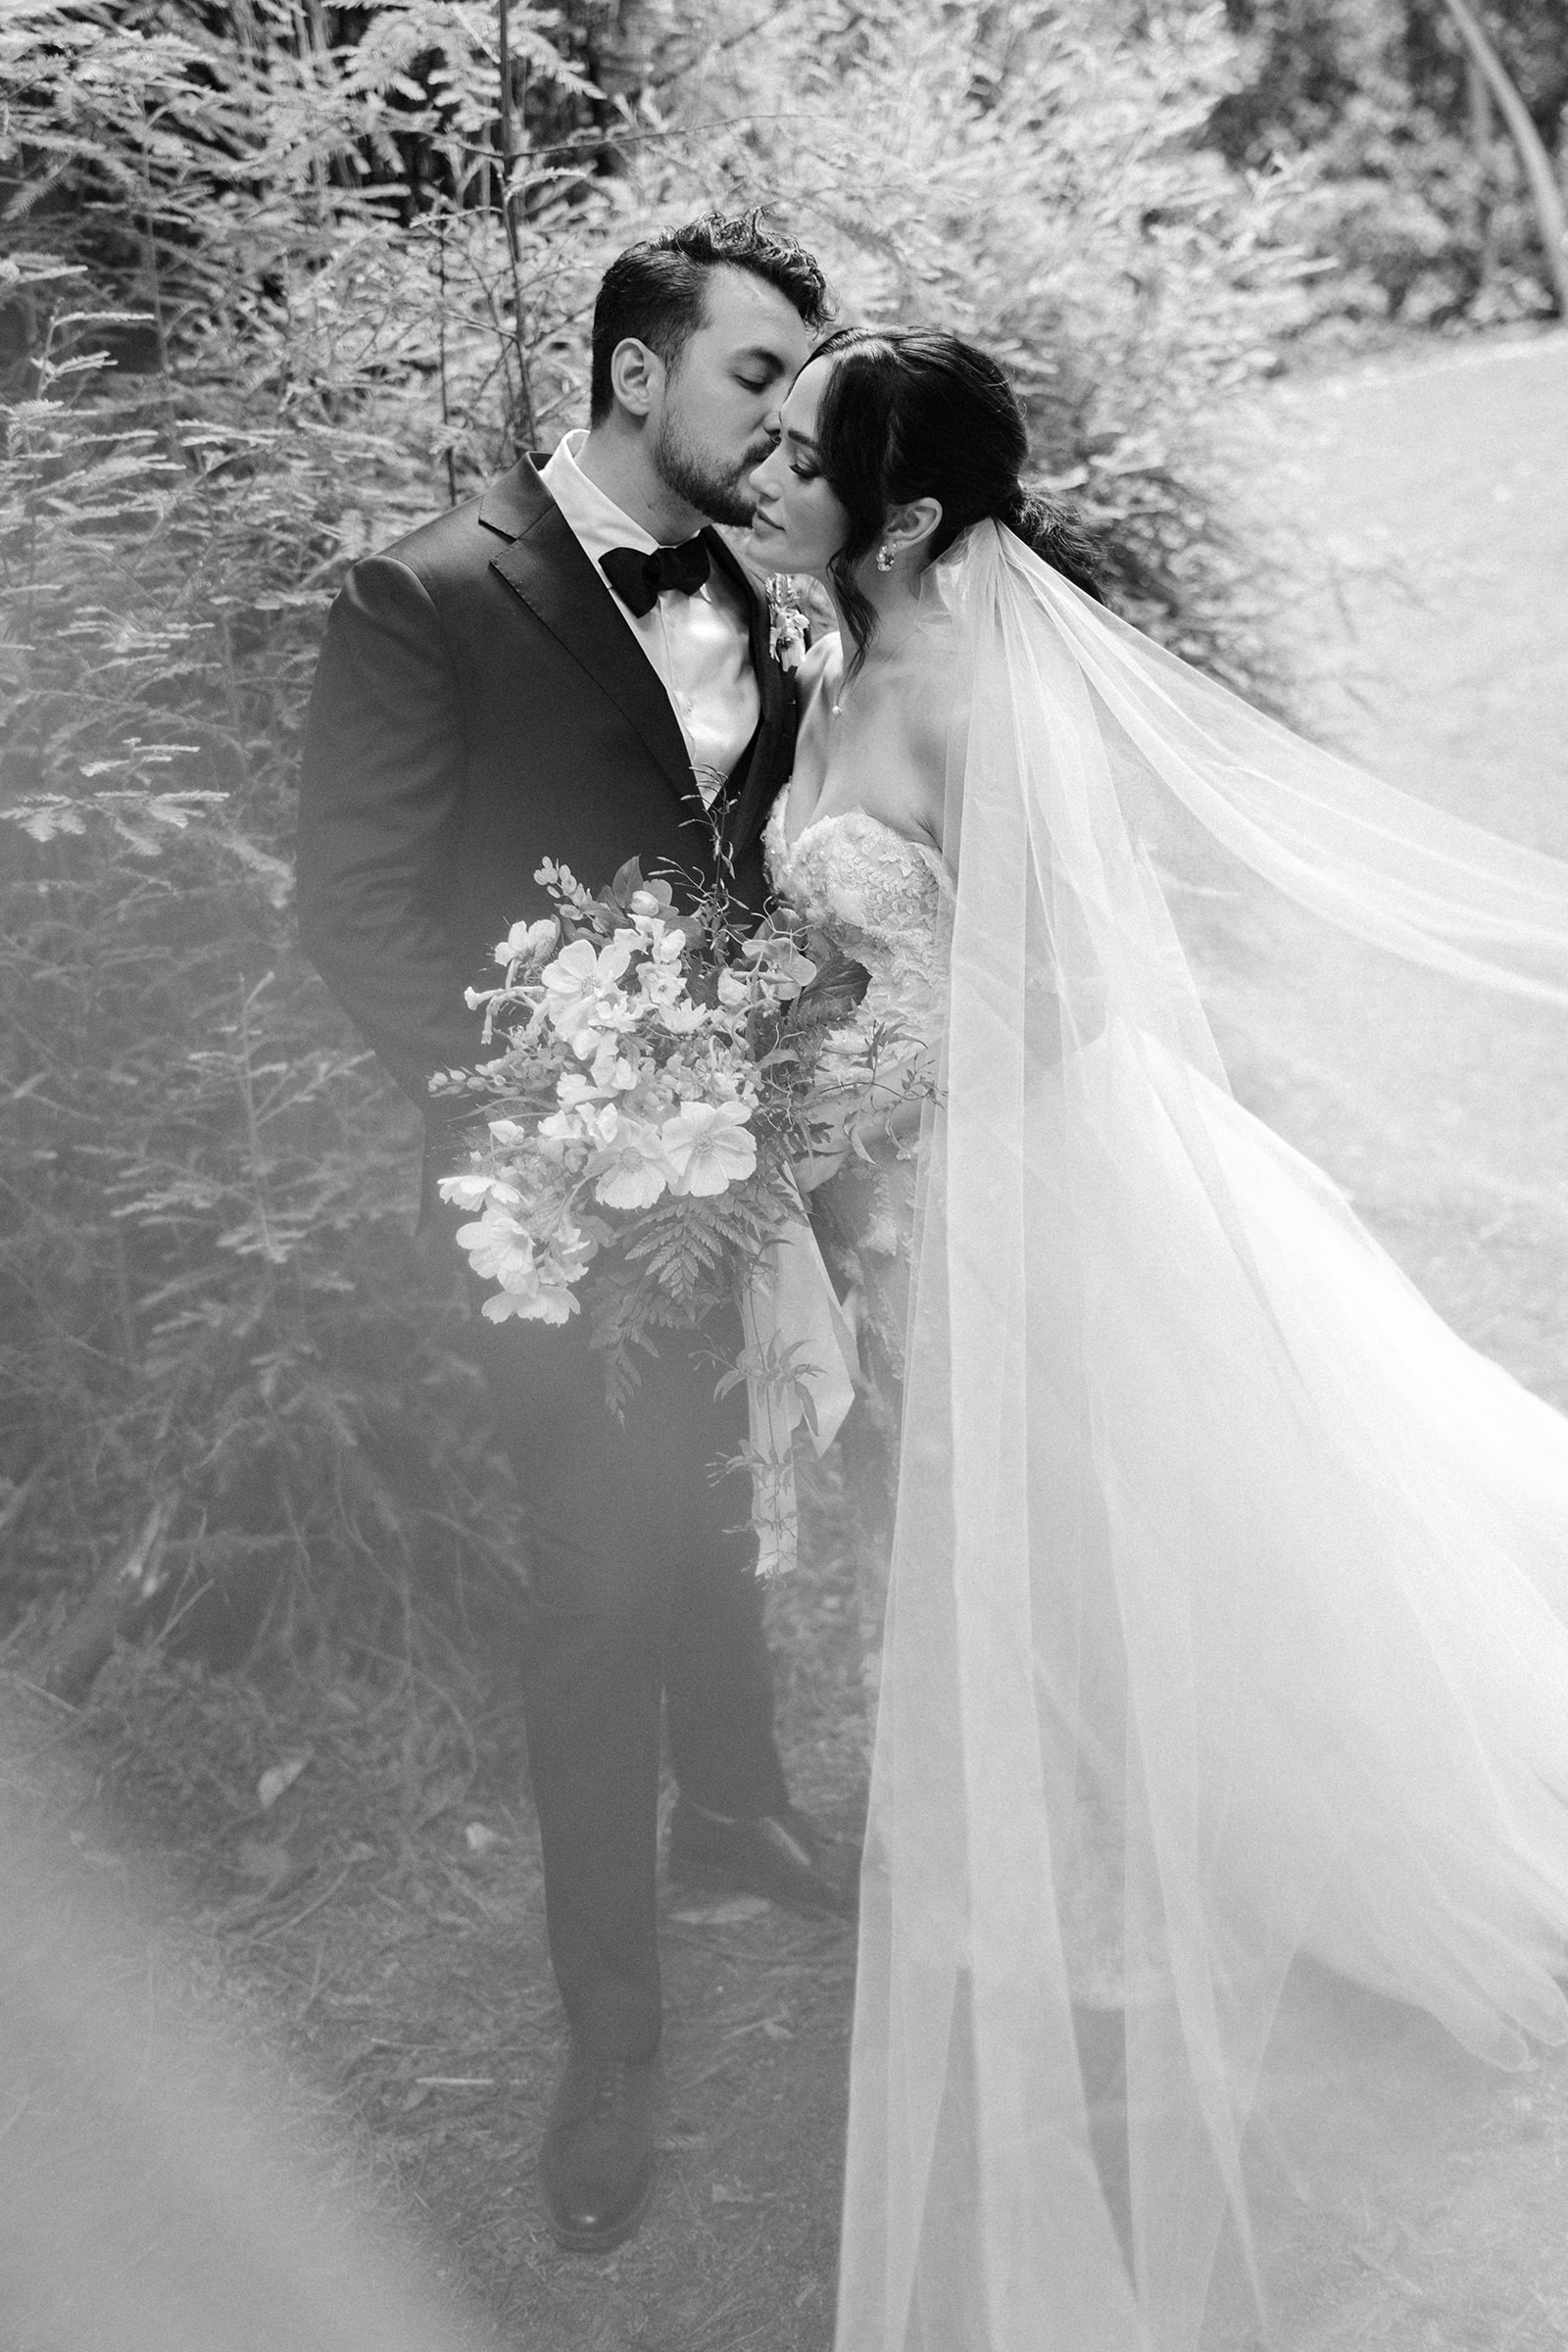 Editorial black and white wedding portraits